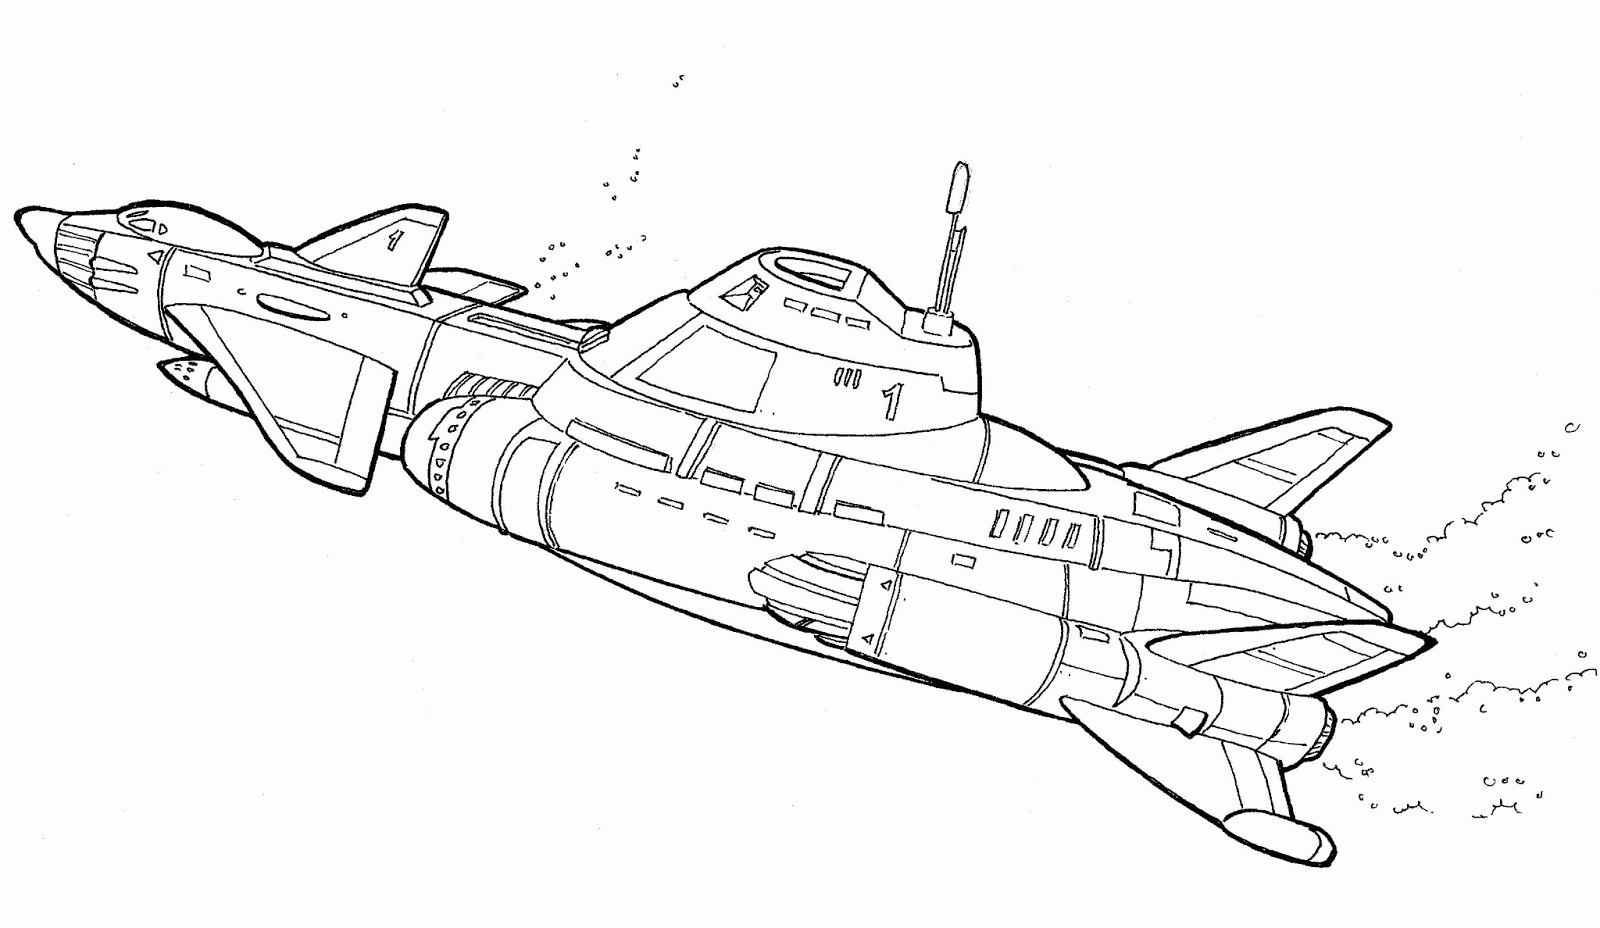 submarine coloring pages submarine coloring pages coloring pages to download and submarine coloring pages 1 3